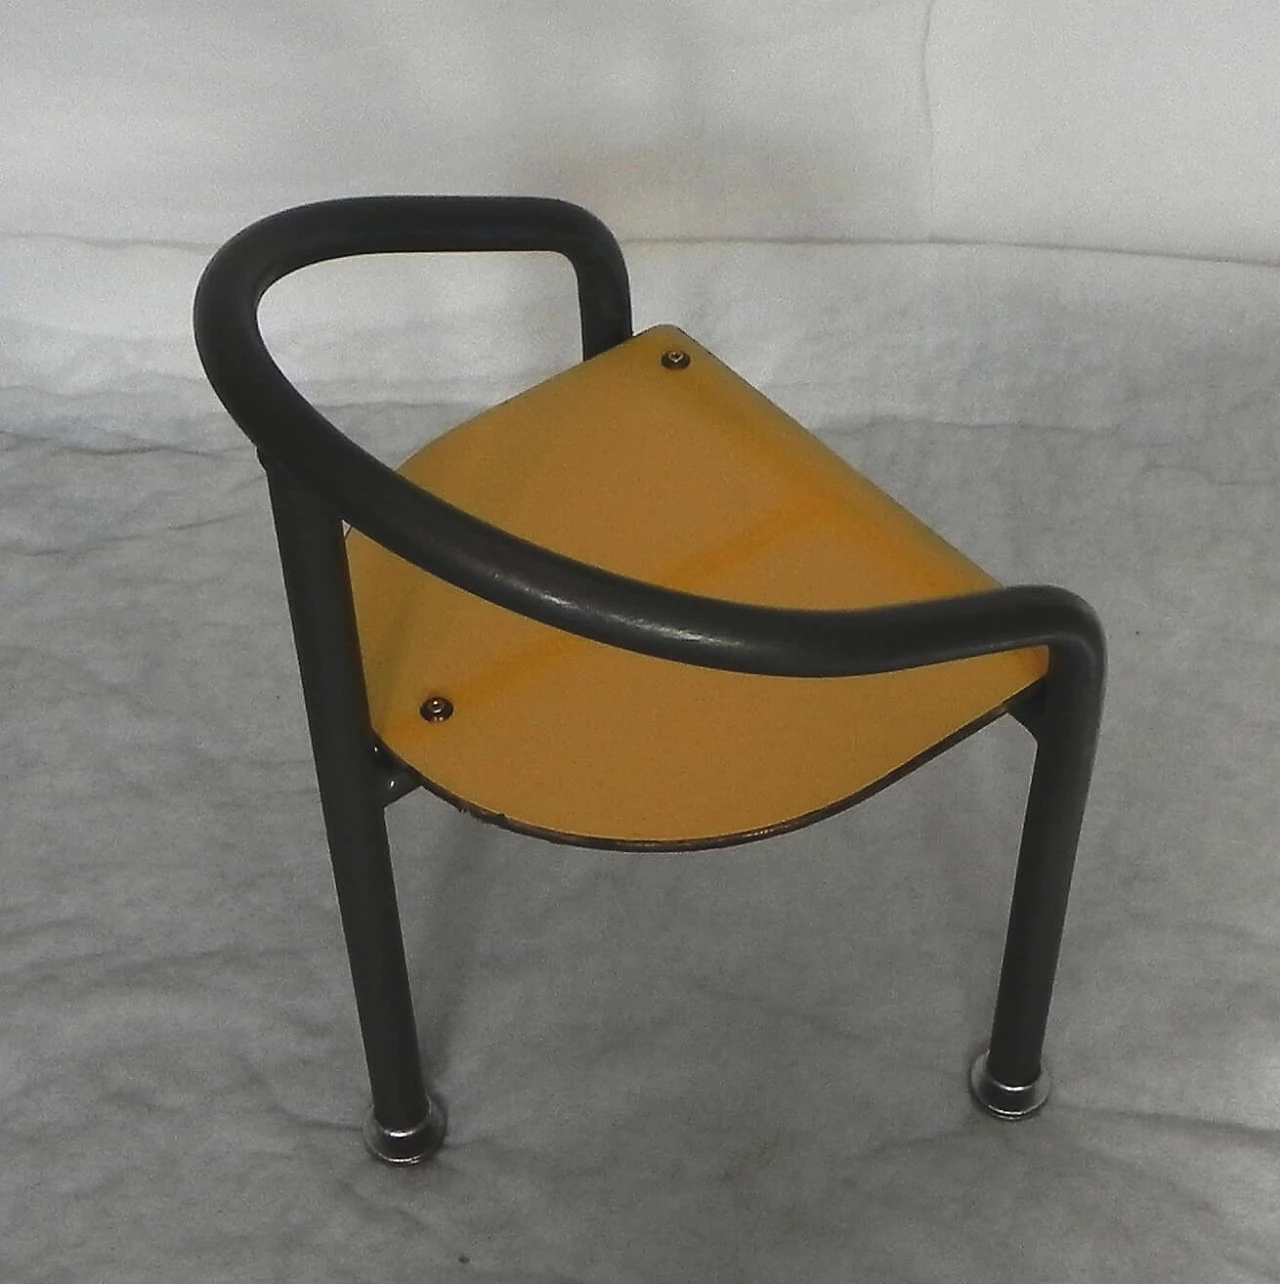 Children's chair from a merry-go-round, 1980s 8